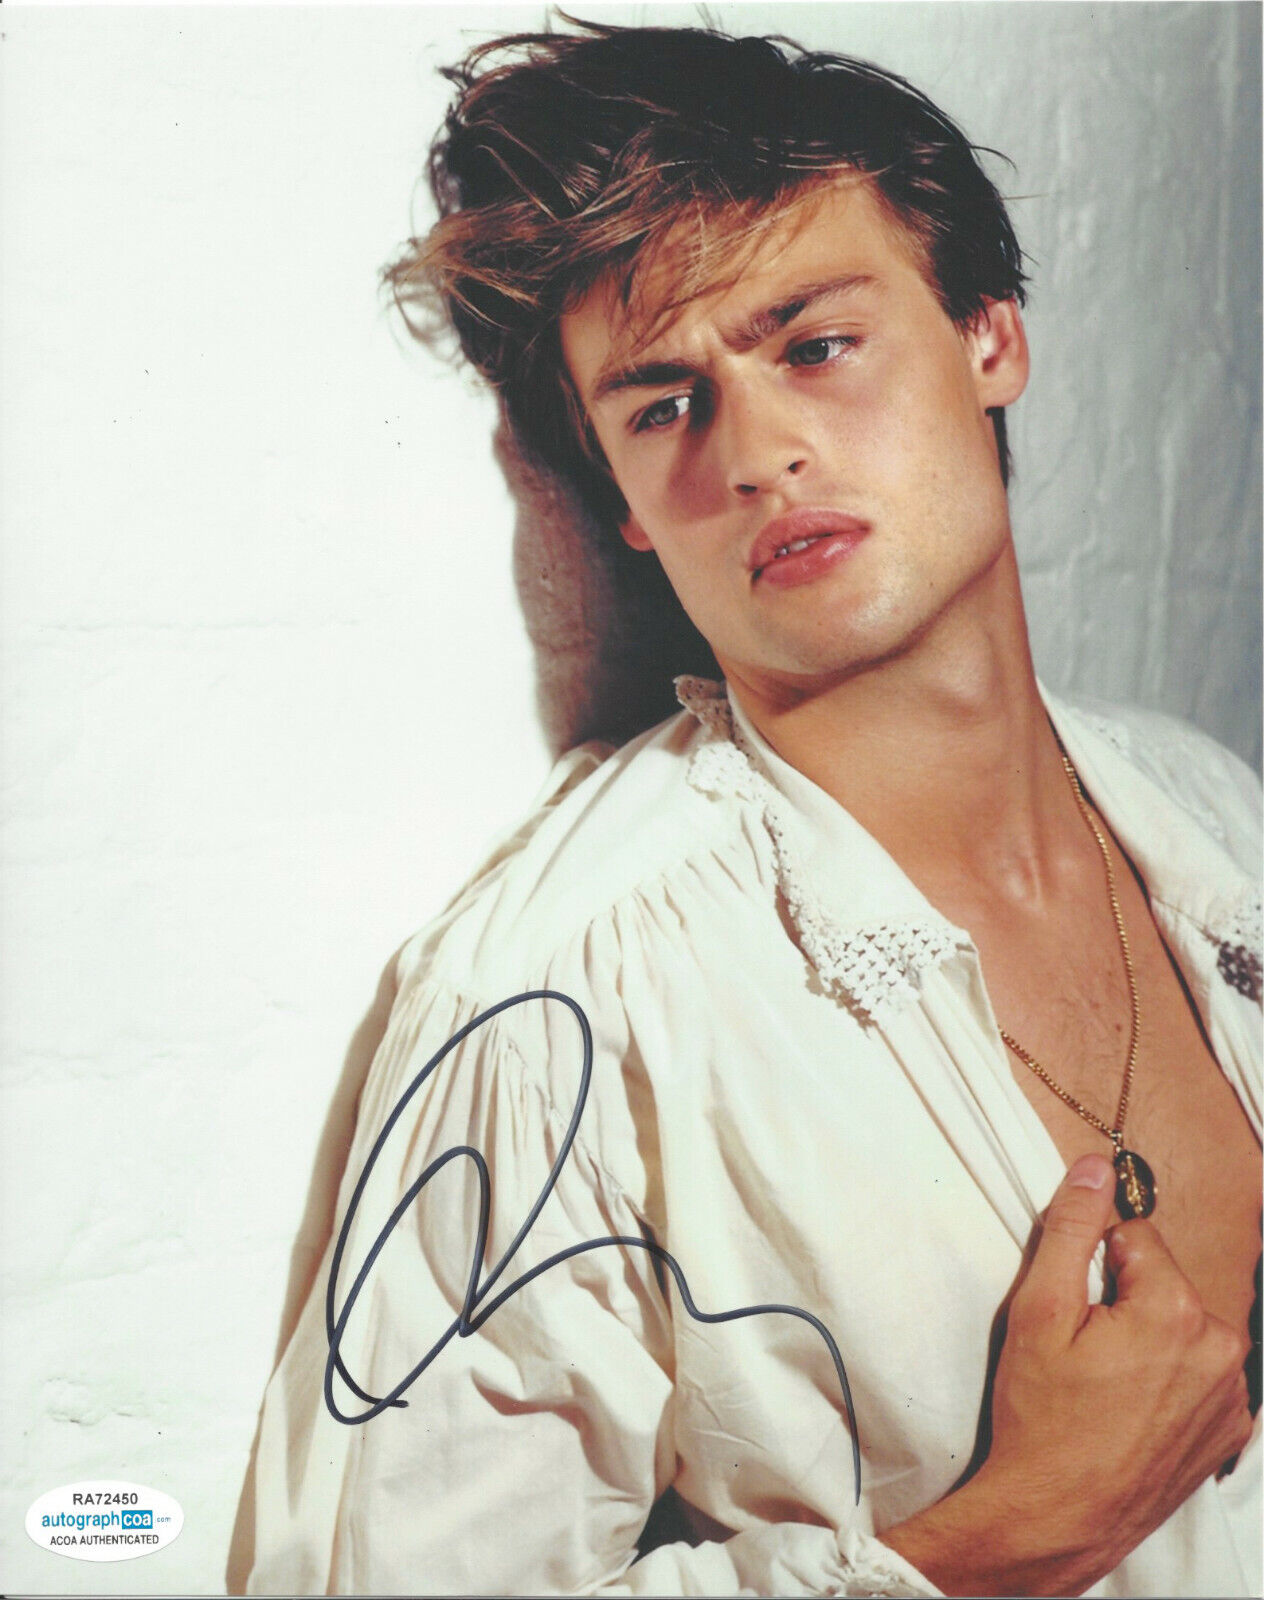 ACTOR DOUGLAS BOOTH SIGNED AUTHENTIC AUTOGRAPH 'THE DIRT' 8X10 Photo Poster painting ACOA